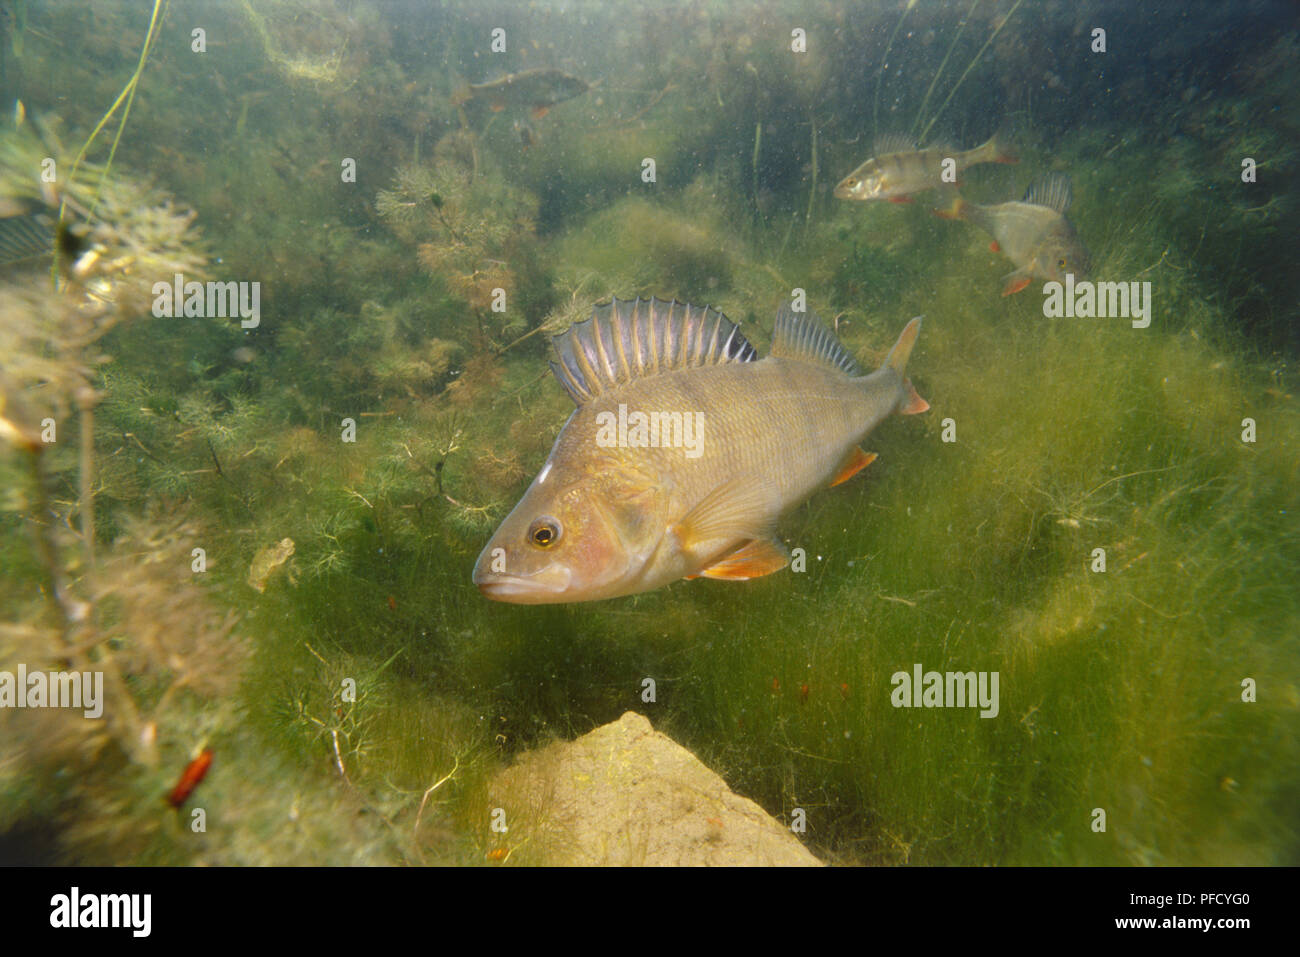 Underwater shot of a yellow perch with a spiny dorsal fin against the murky green water of a lake with plants, reeds and rocks on the bottom. Stock Photo